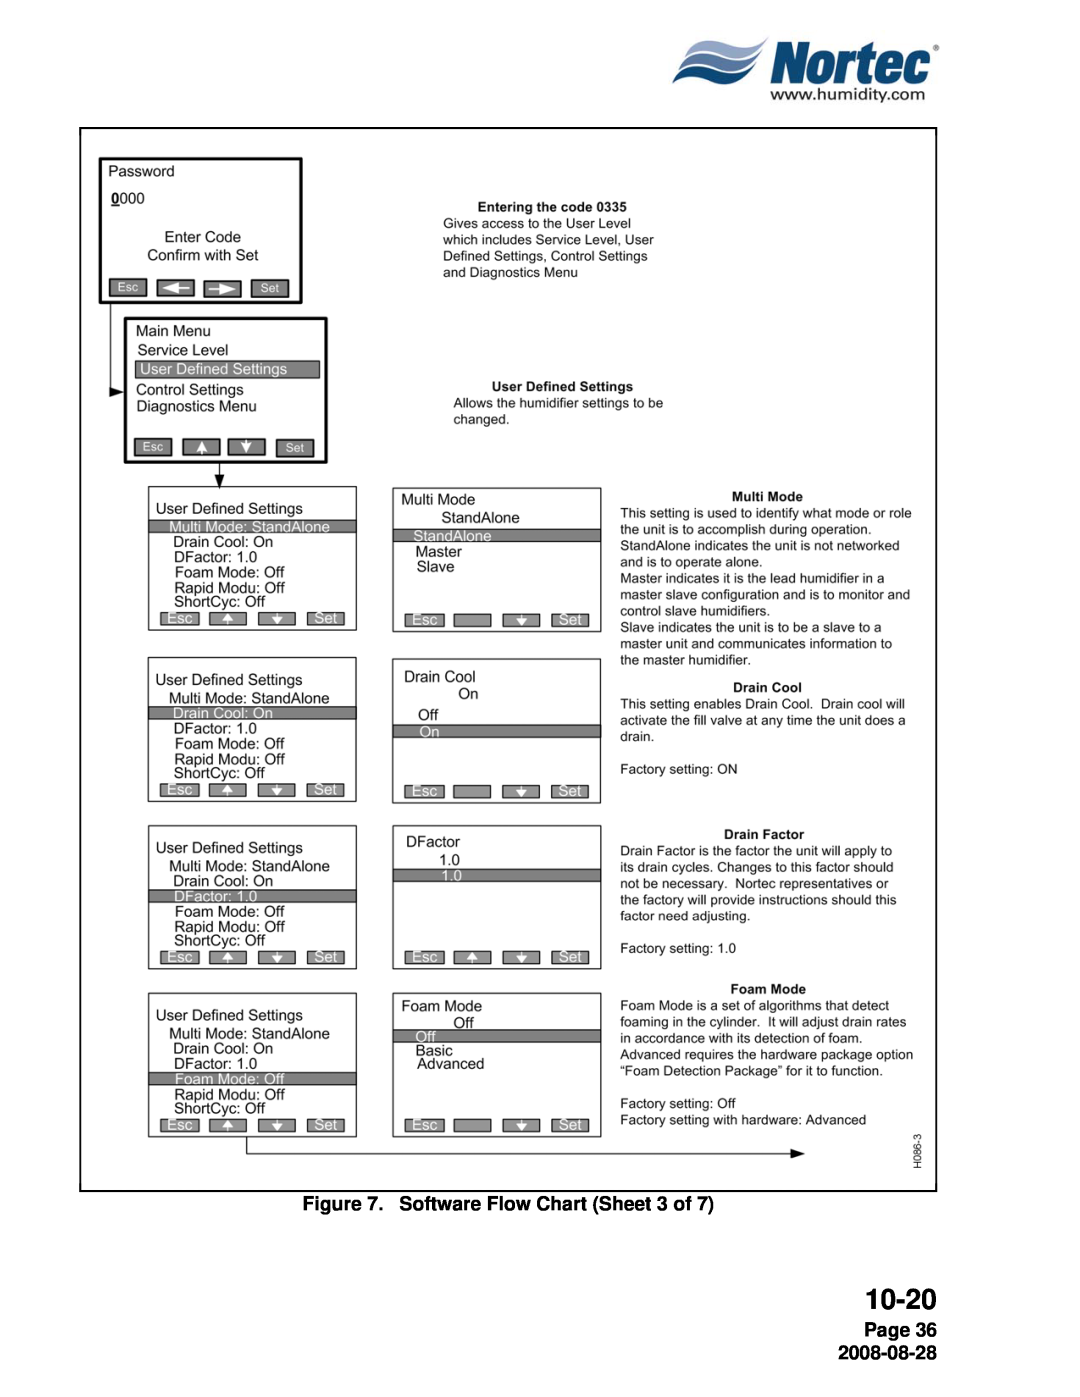 Nortec NH Series installation manual Software Flow Chart Sheet 3 of, Page 36, 10-20 